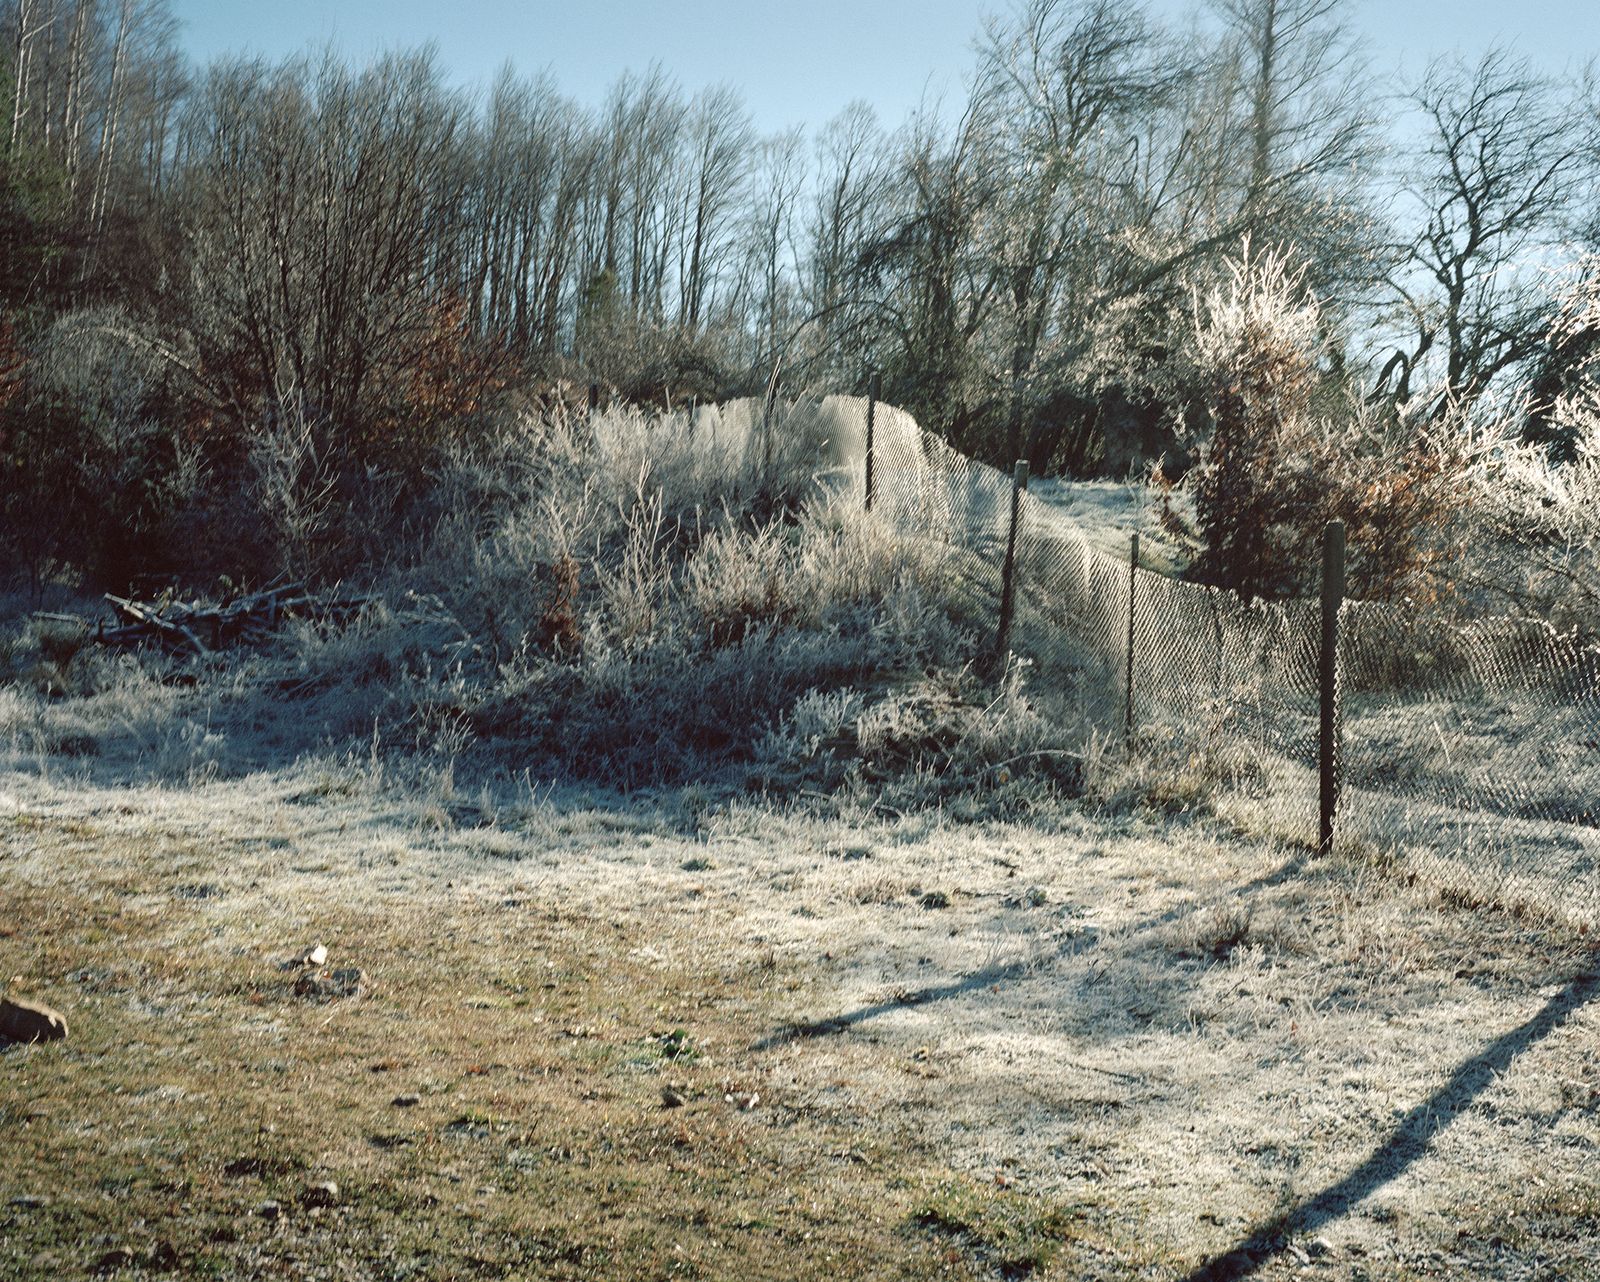 © Tommaso Rada - Bulgaria, Rudozen. The fence part of the old Iron Curtain that was separating Bulgaria from Greece.